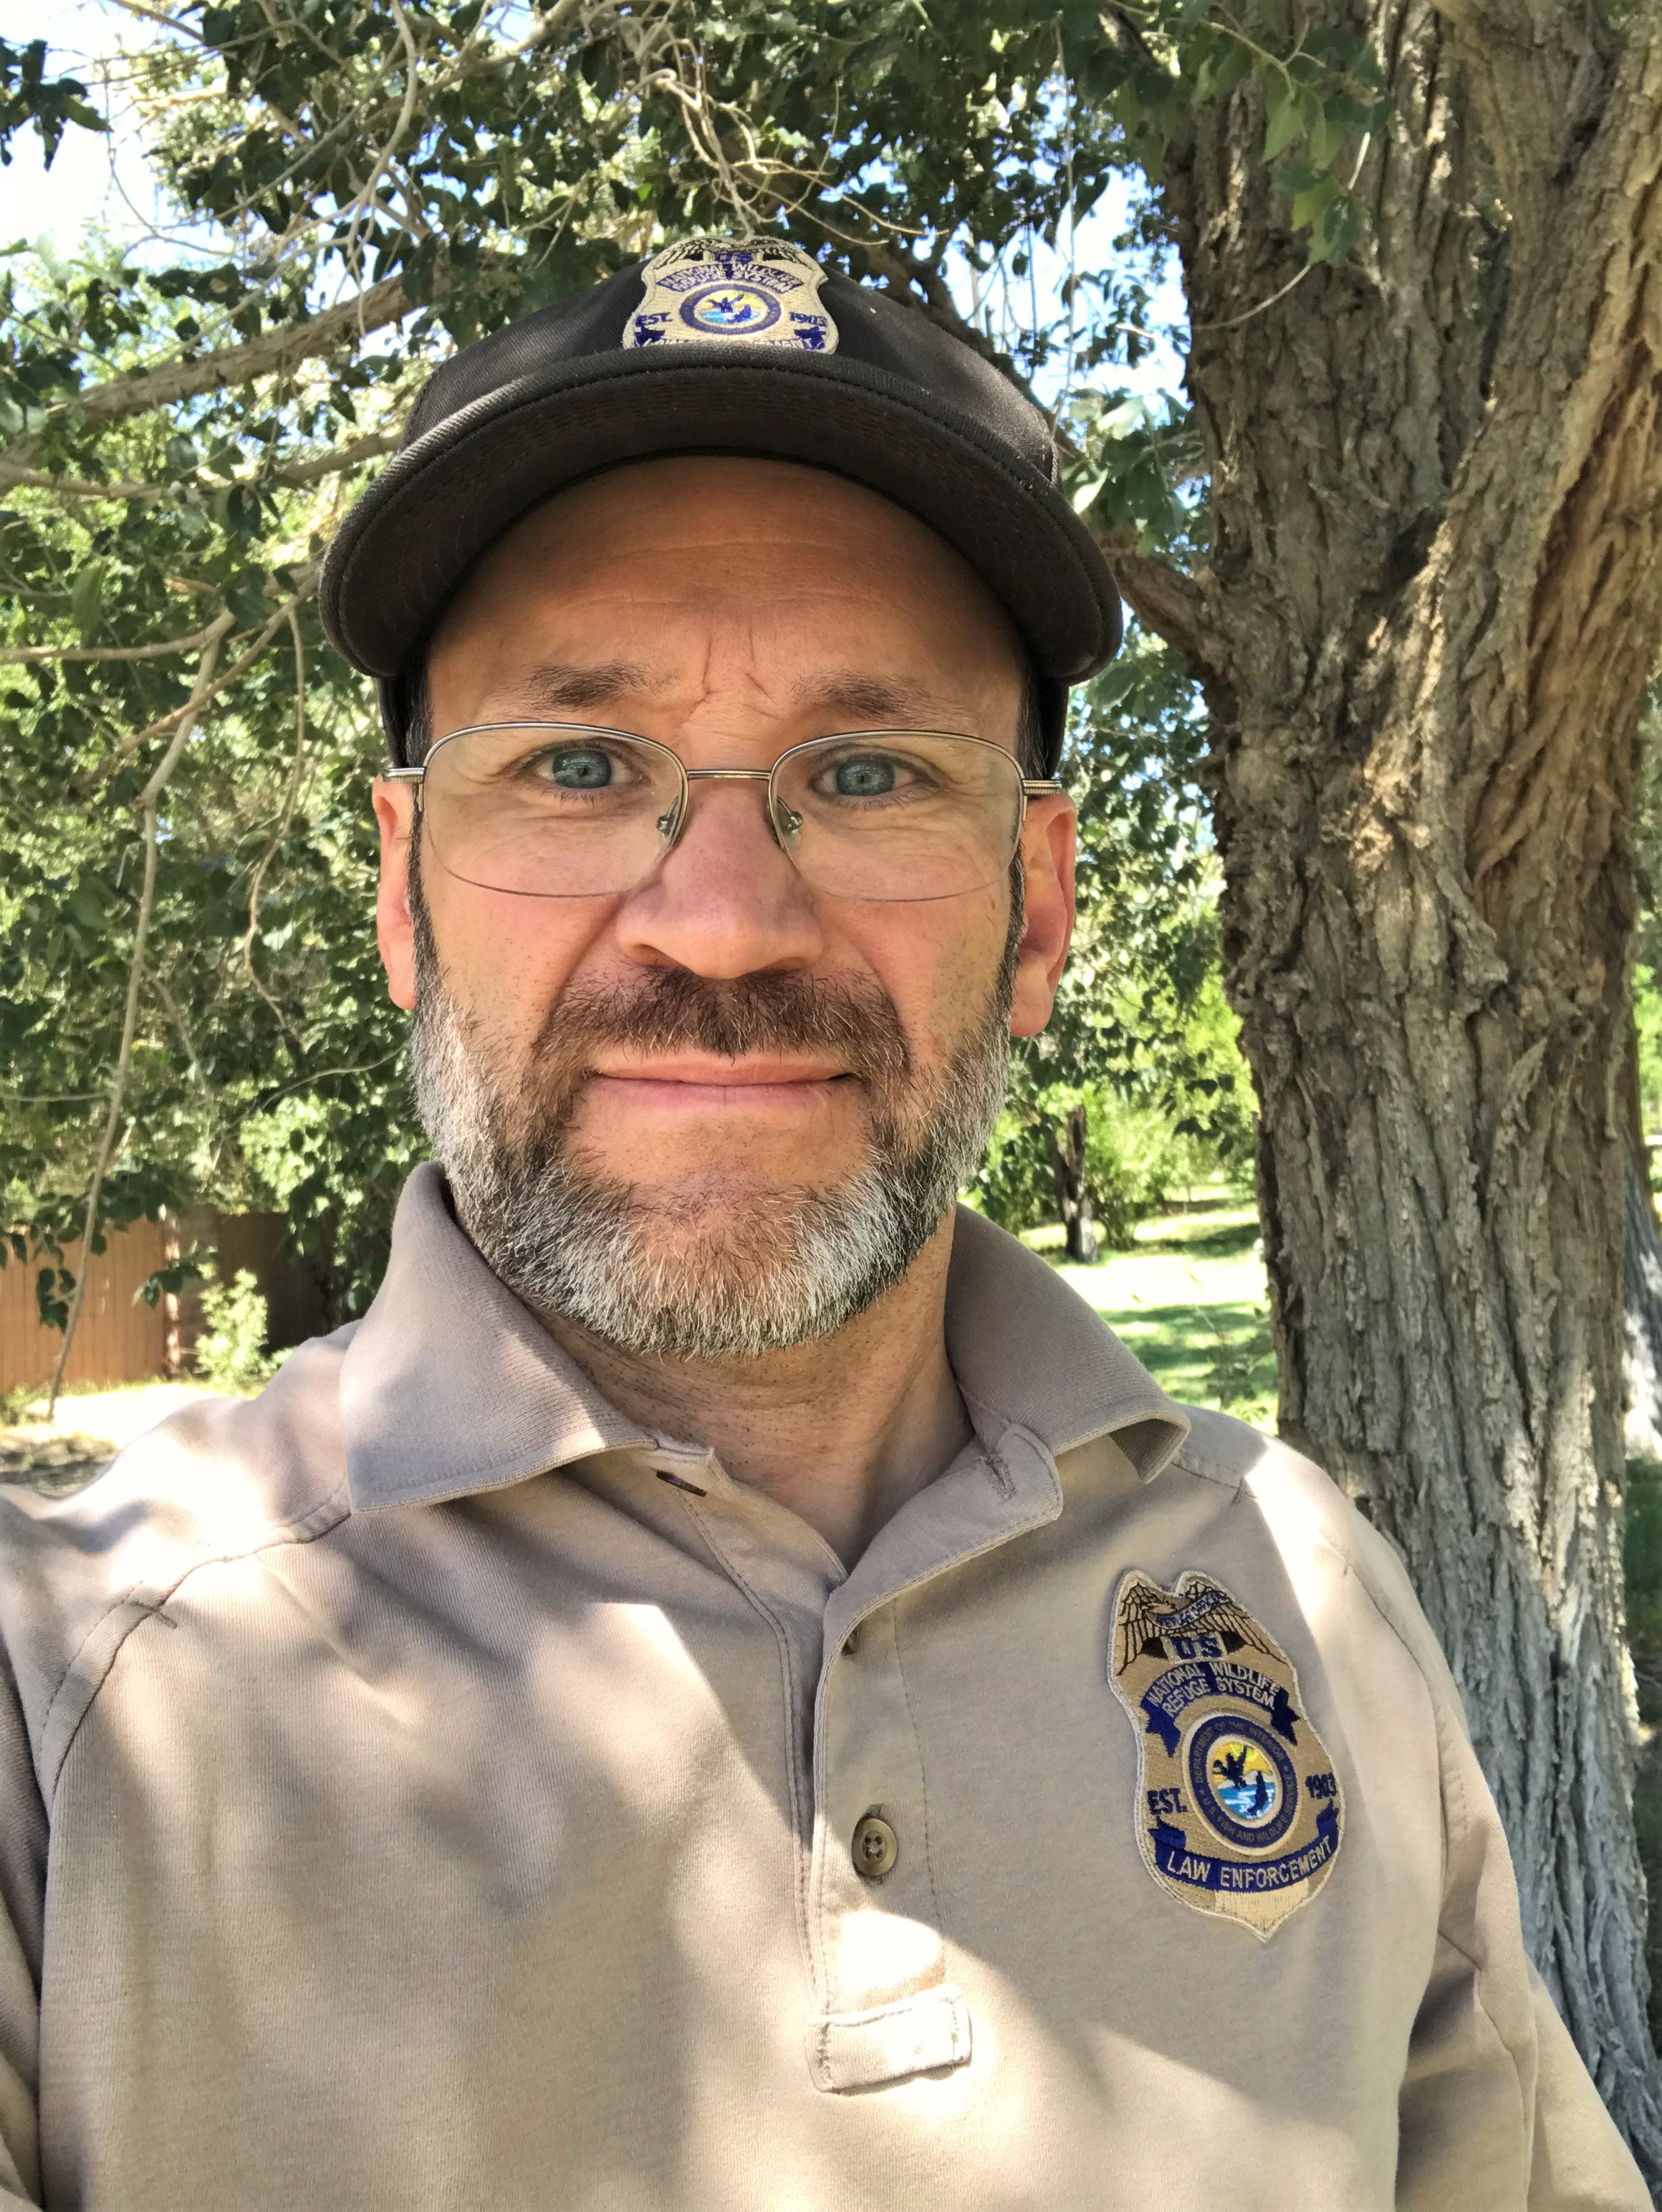 A smiling man with a beard and glasses in a U.S. Fish and Wildlife Service cap and uniform standing near a tree